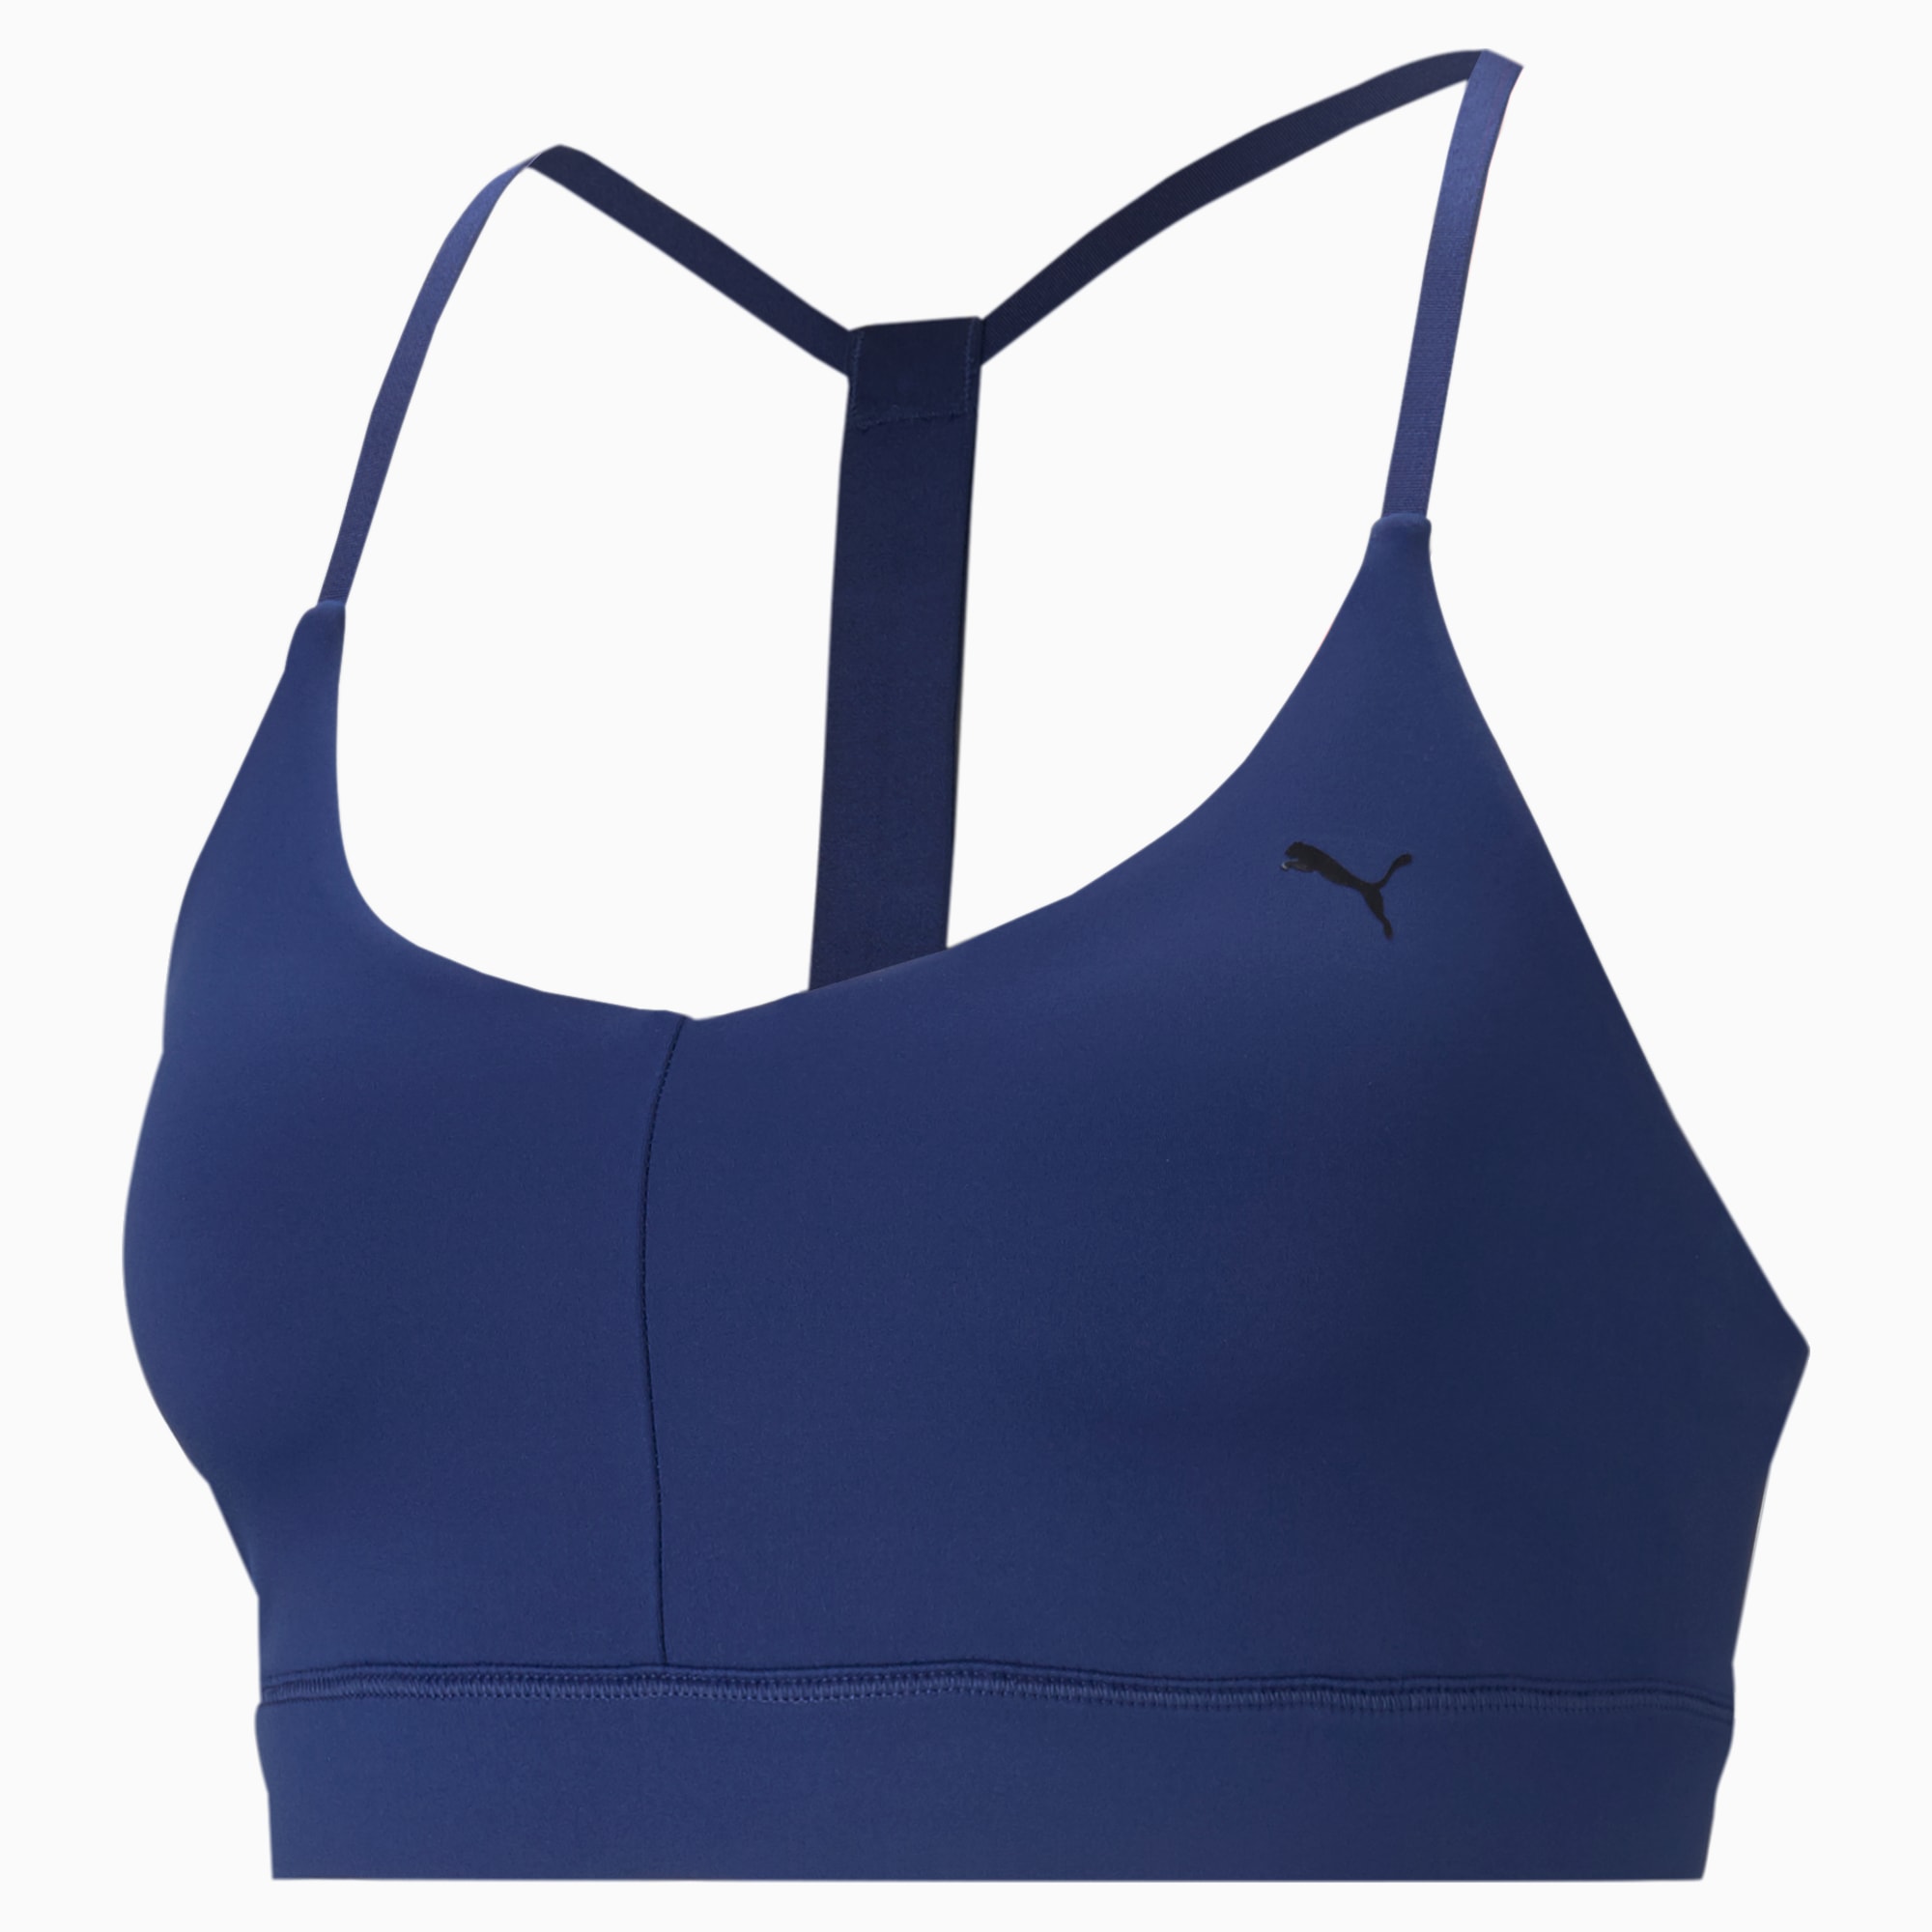 Women's Low Support Strappy Longline Bra - All in Motion Teal Medium. B21 